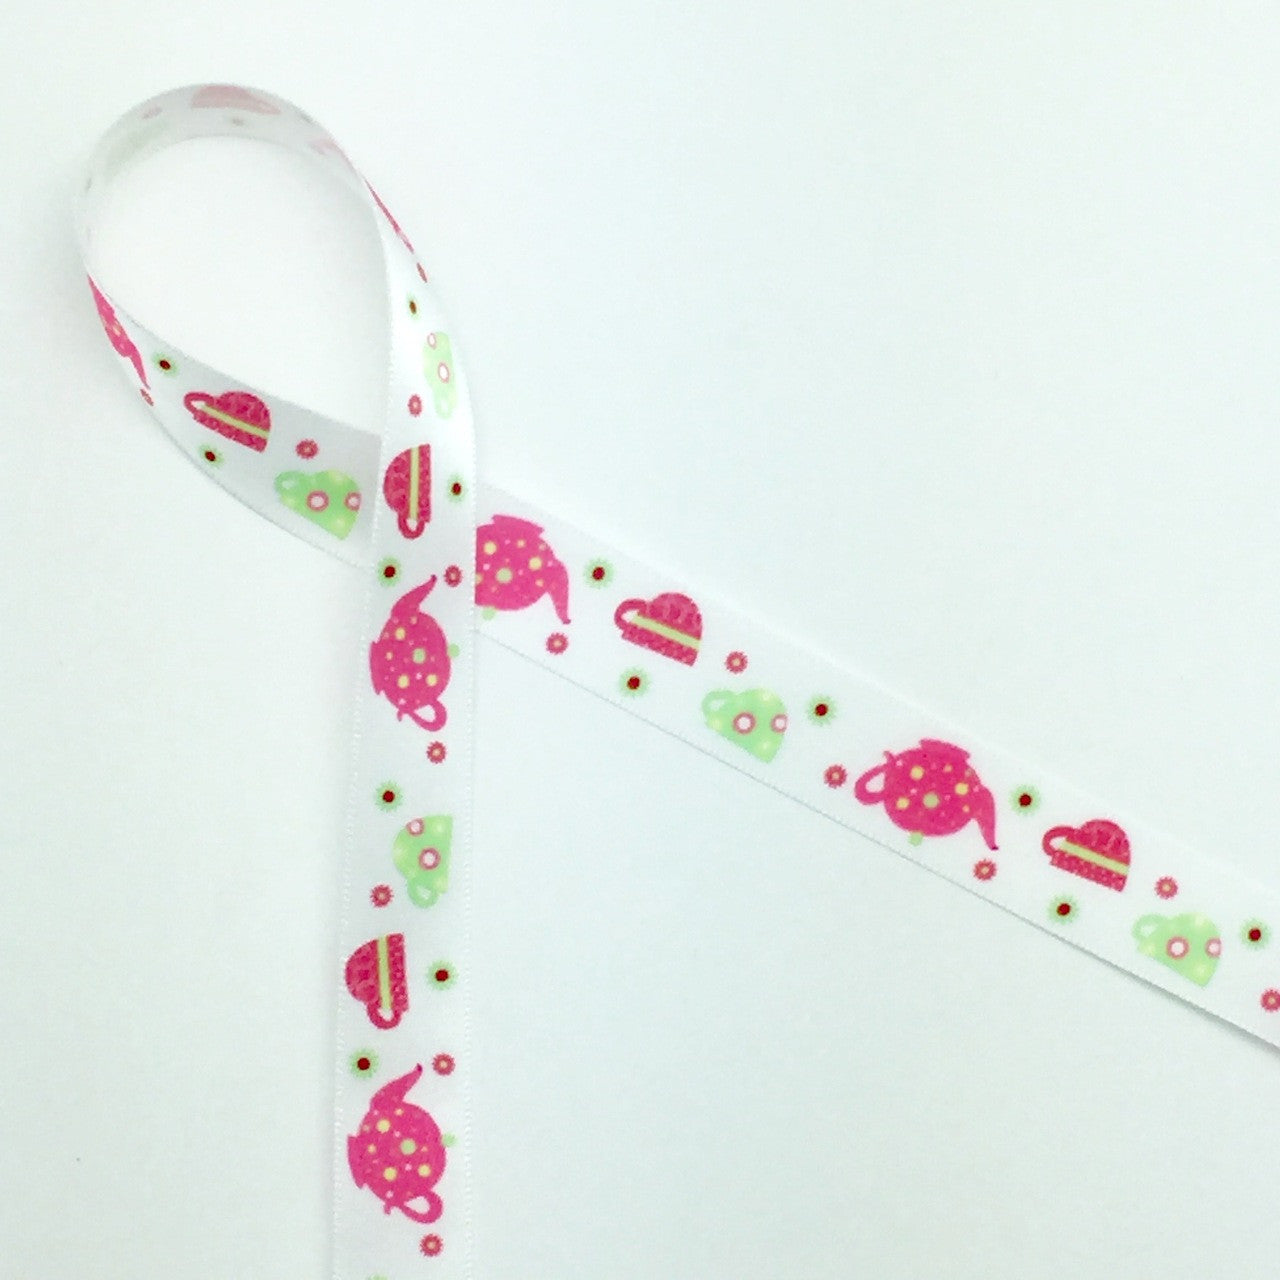 Tea pots and tea cups are featured  in pink and green on a 5/8" white single face satin ribbon. Treat Mom to some spiced tea and cookies tied with this sweet ribbon to capture her heart on Mother's Day!